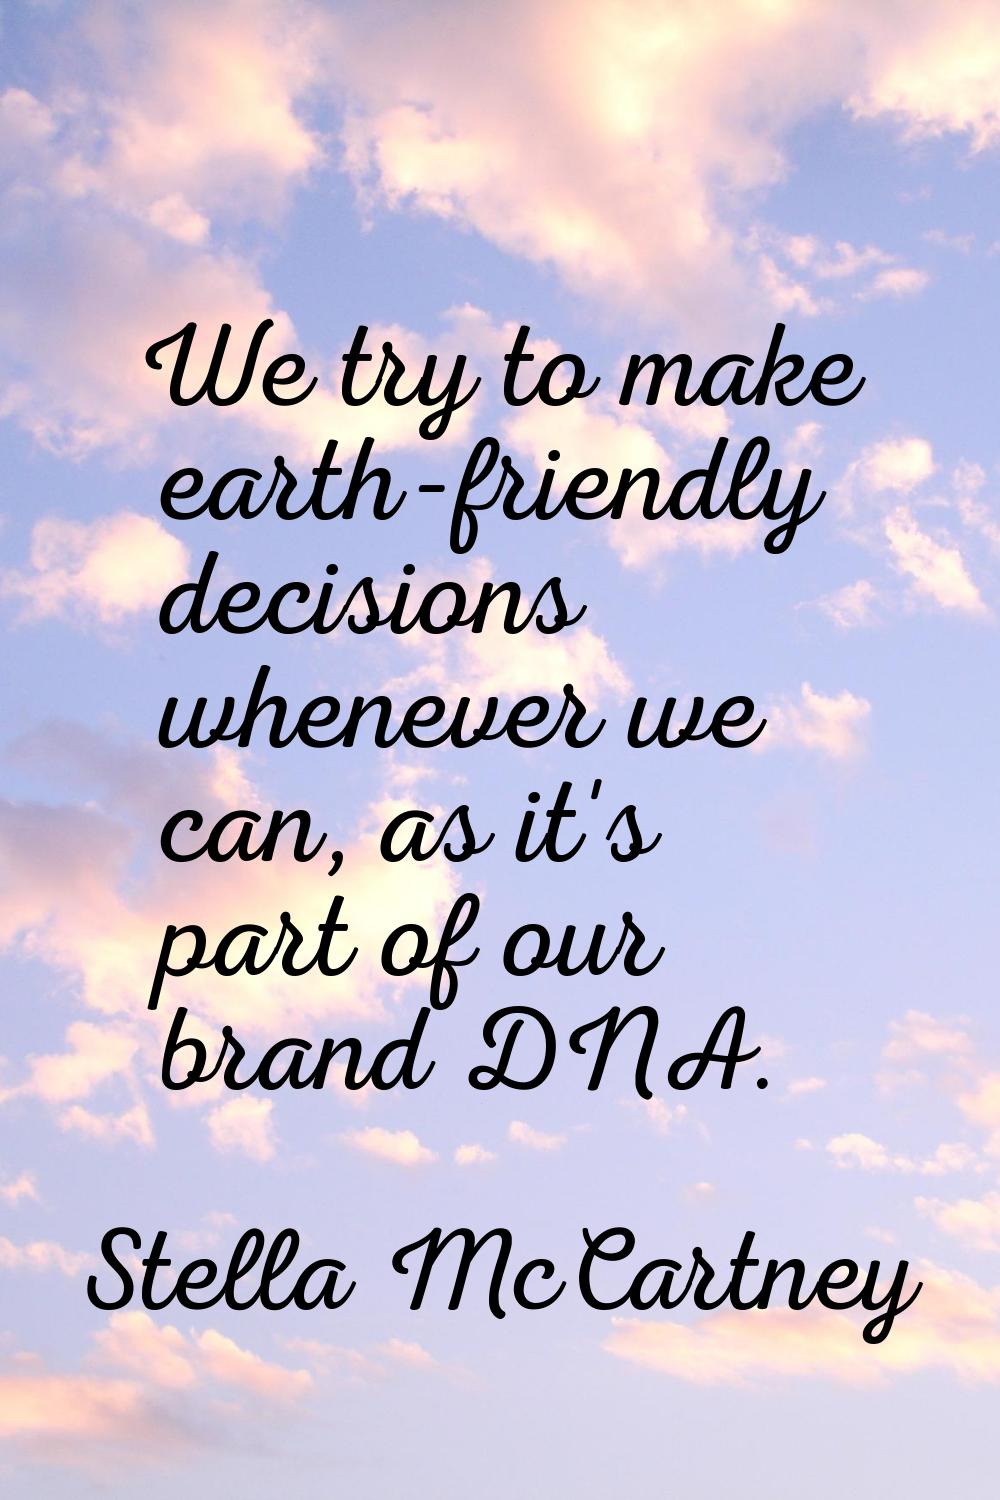 We try to make earth-friendly decisions whenever we can, as it's part of our brand DNA.